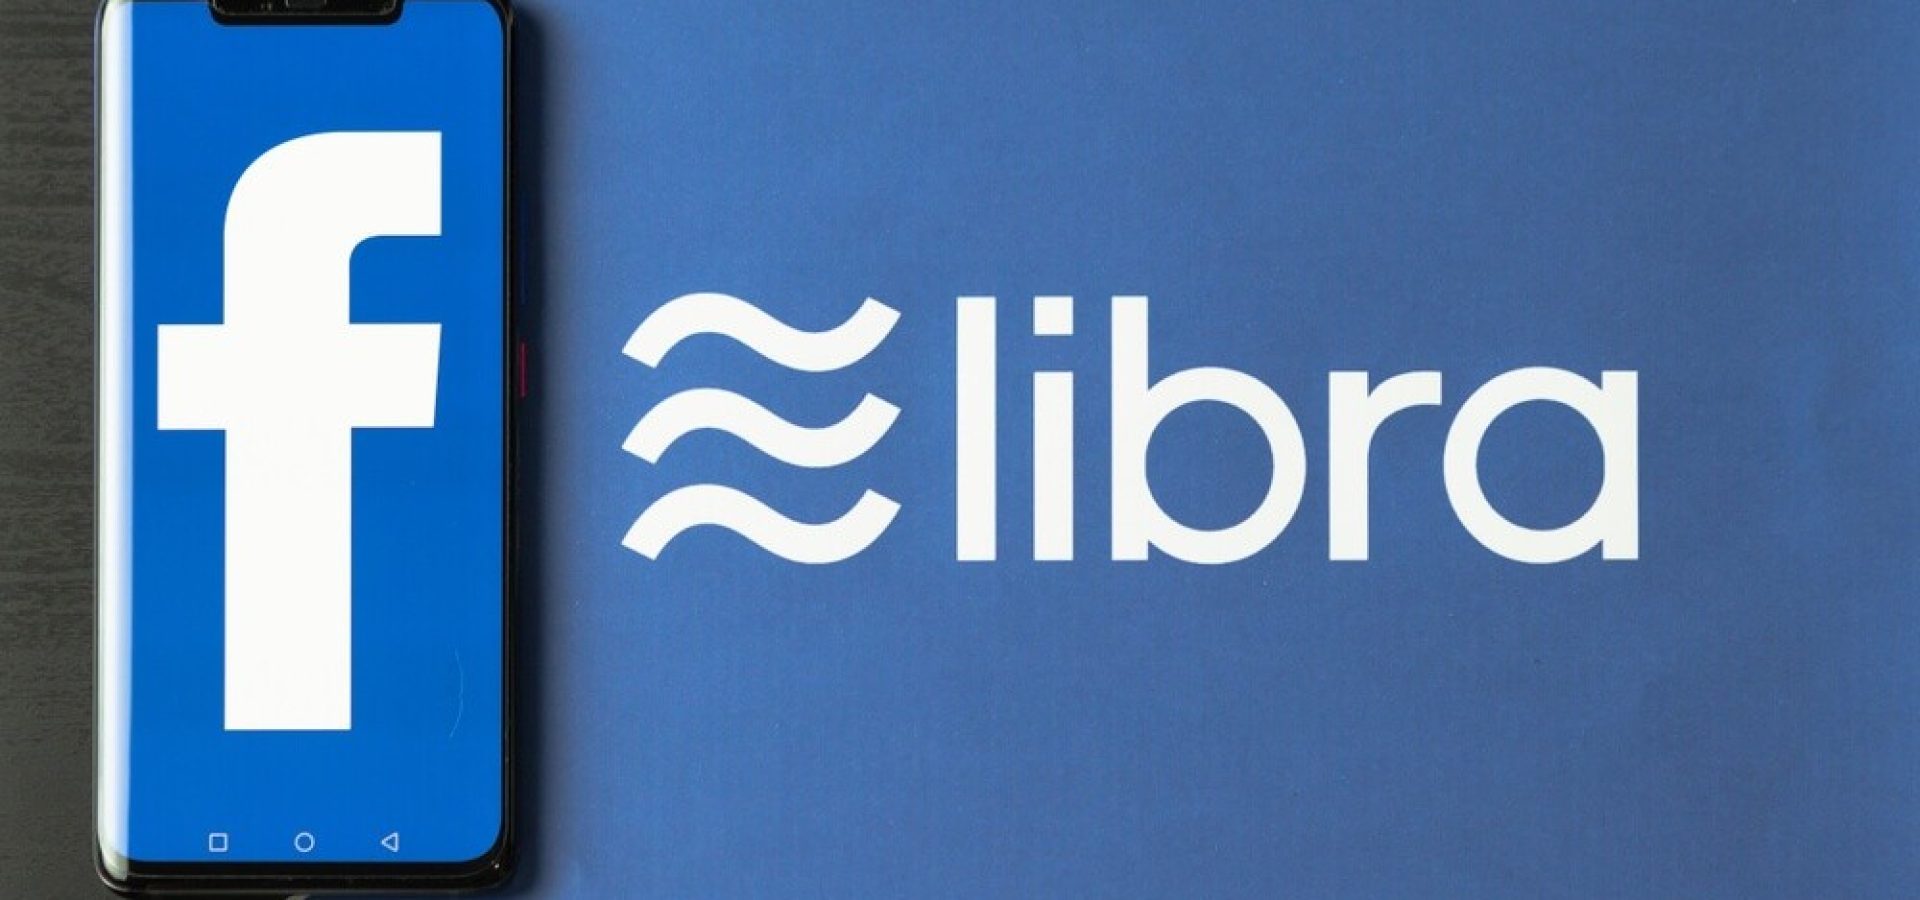 Wibets - FB: Phone with Facebook logo on screen is placed on paper with Libra logo.